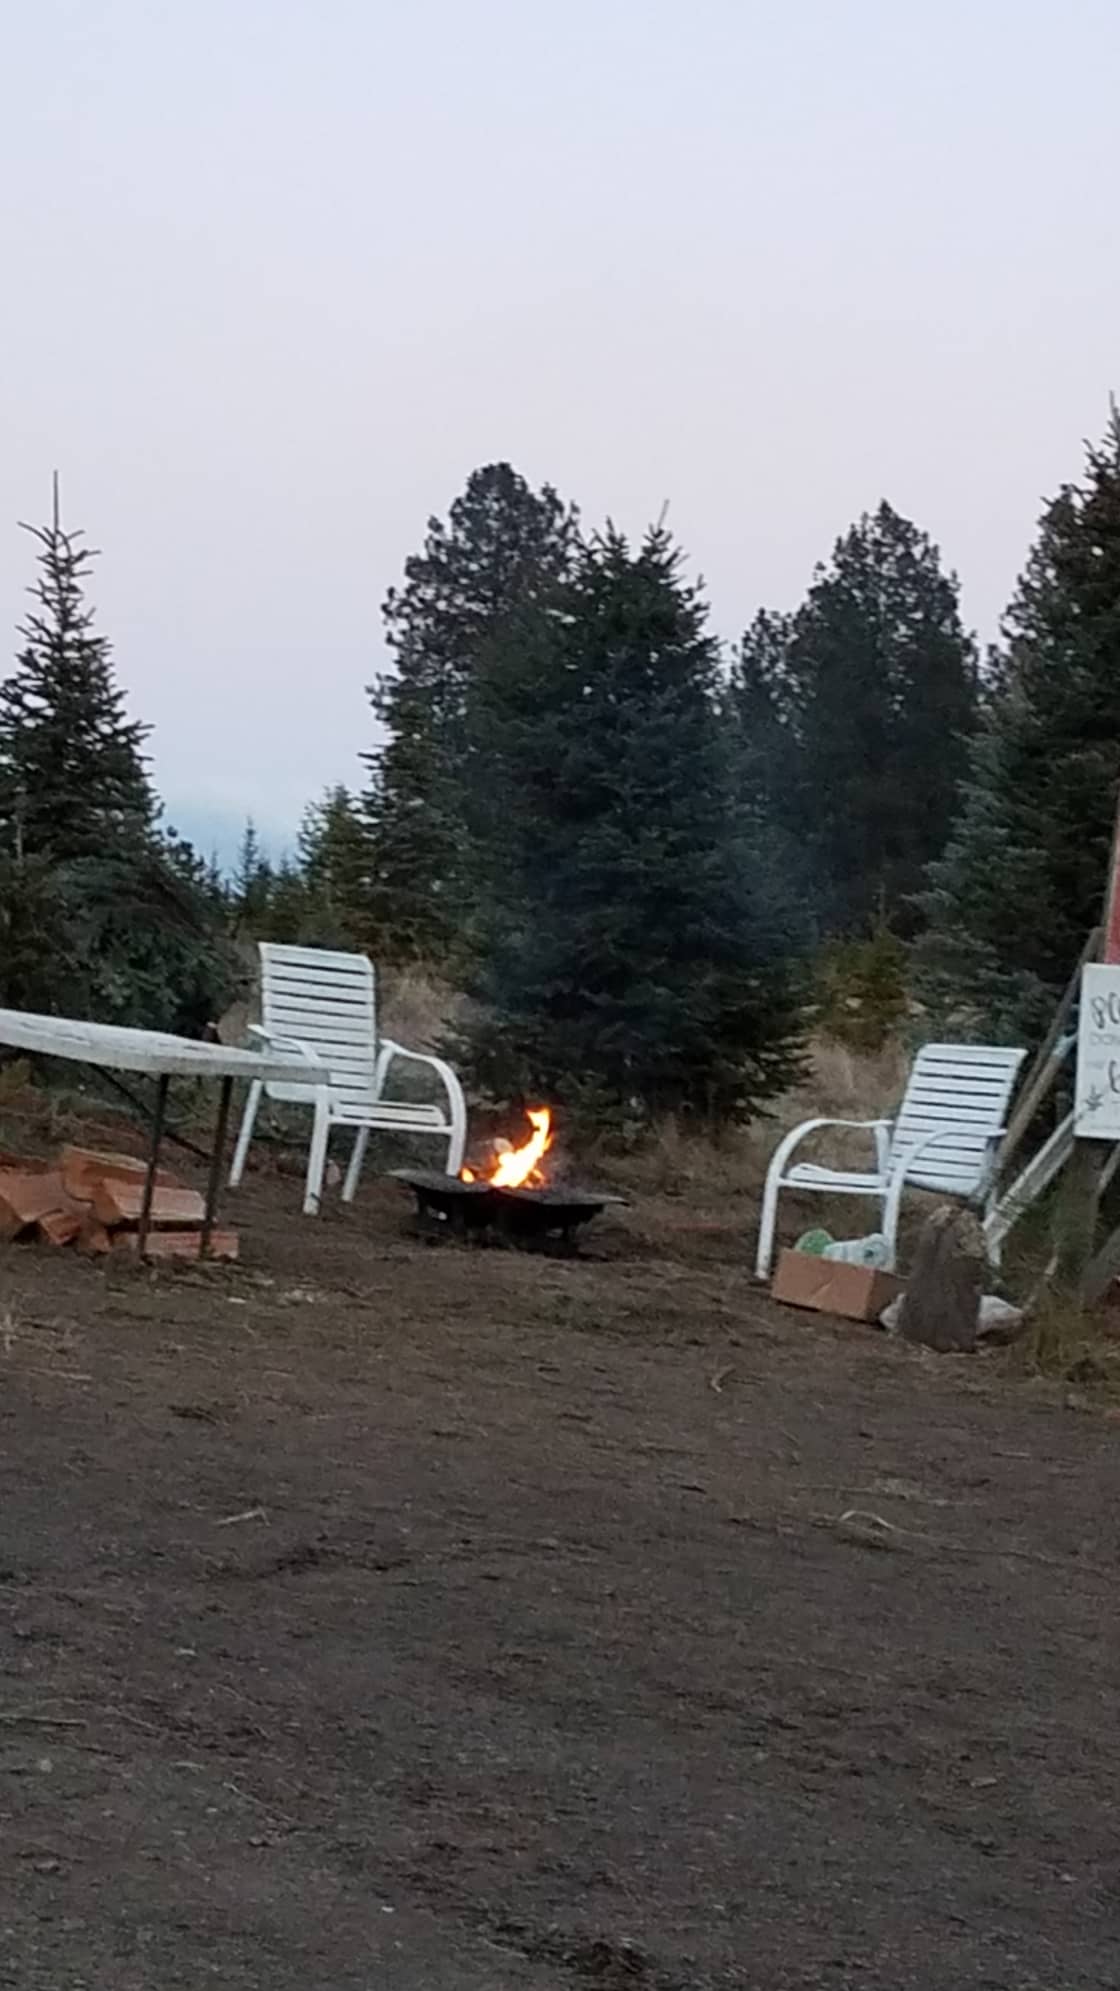 A peaceful campfire in the quiet of evening on the farm